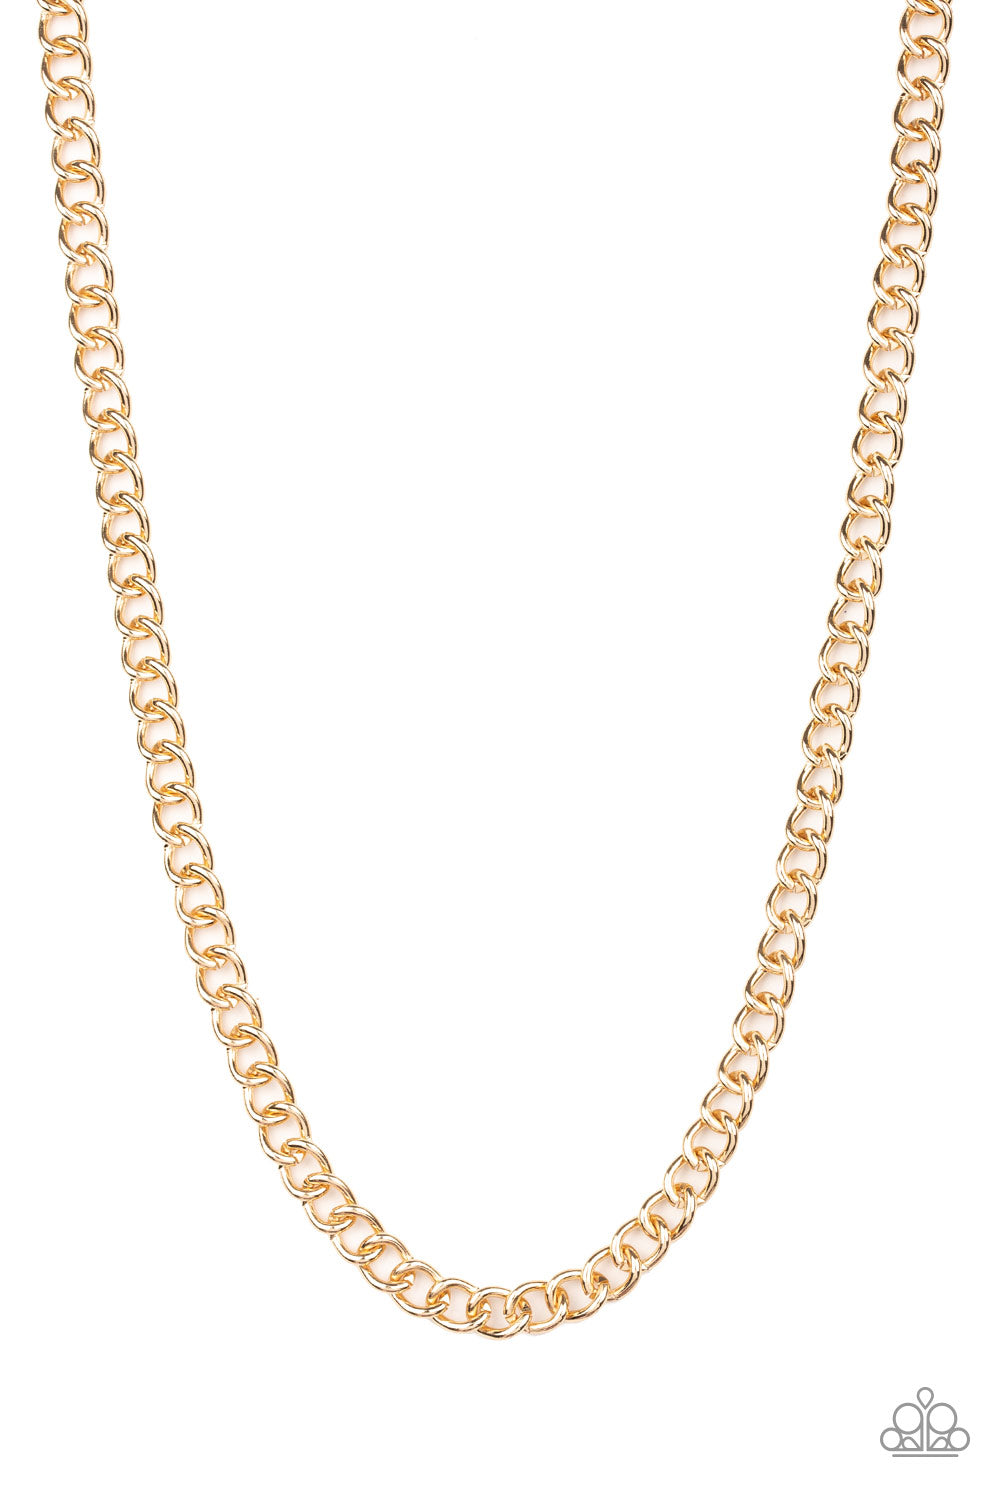 Full Court Gold Urban Necklace - Paparazzi Accessories  Brushed in a high-sheen finish, a classic gold chain drapes across the chest for a casual look. Features an adjustable clasp closure.  All Paparazzi Accessories are lead free and nickel free!  Sold as one individual necklace.  Get The Complete Look!  Bracelet: "Sideline - Gold" (Sold Separately)